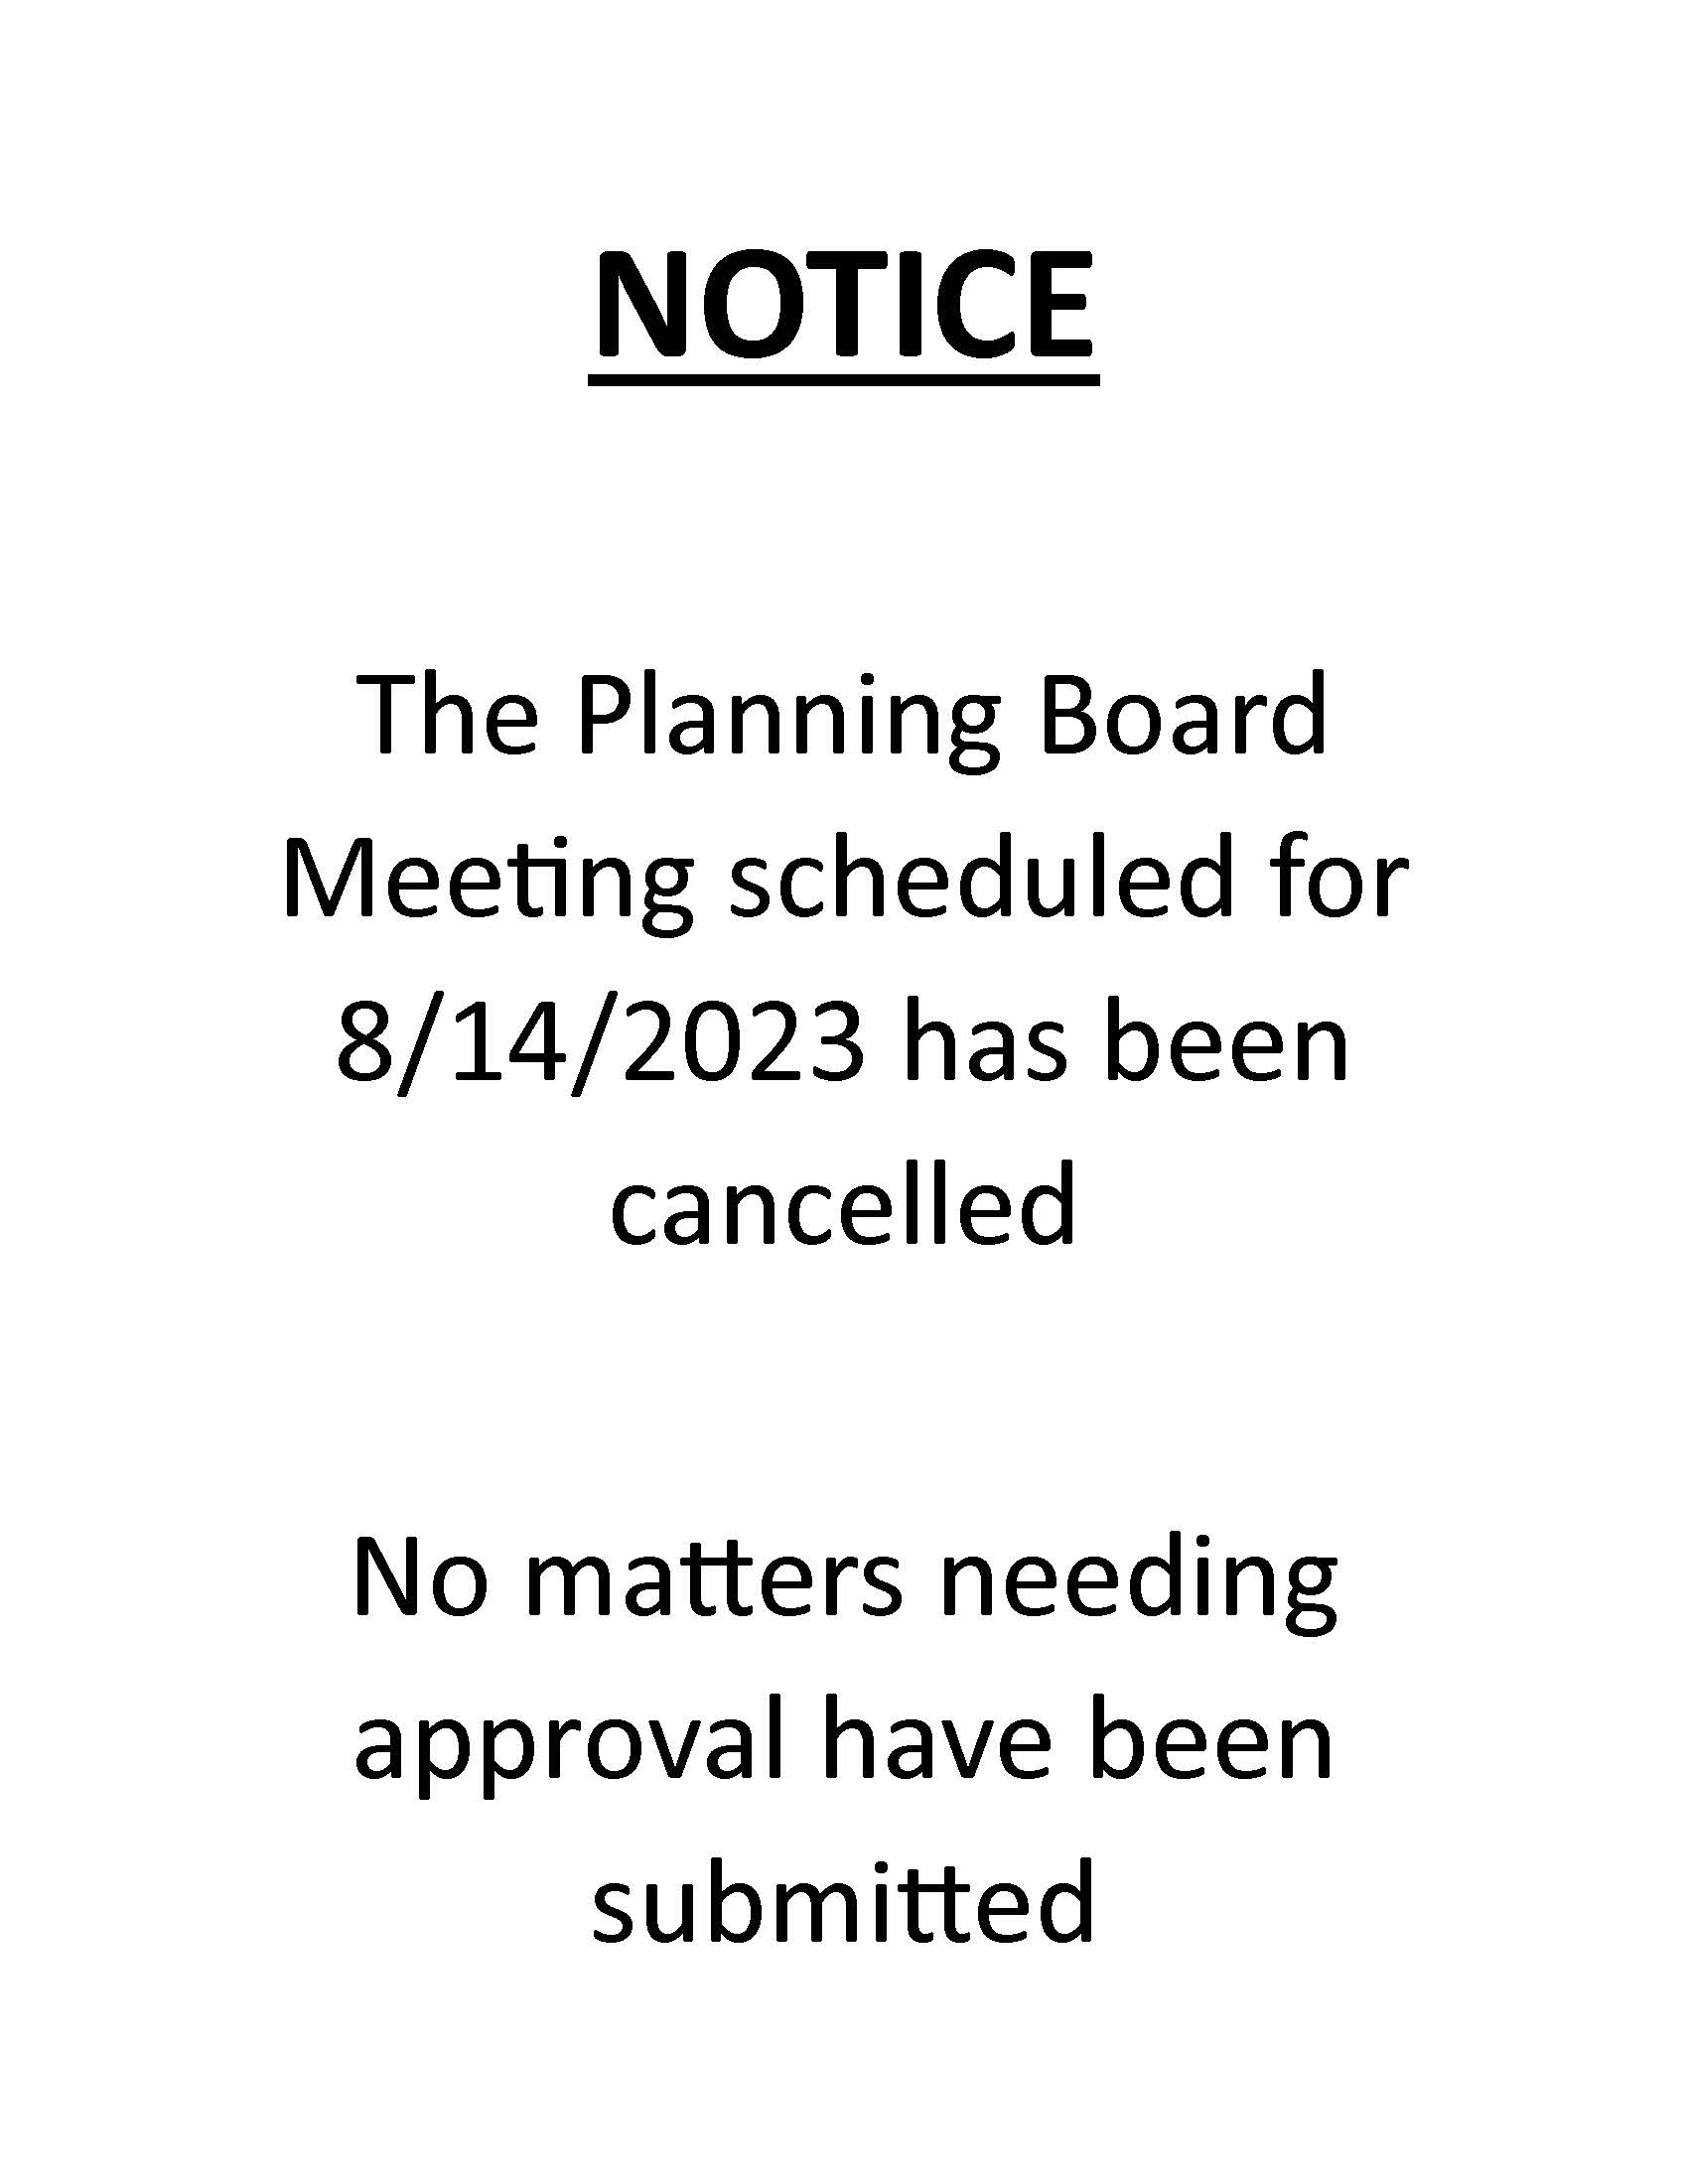 PB cancelled august 2023